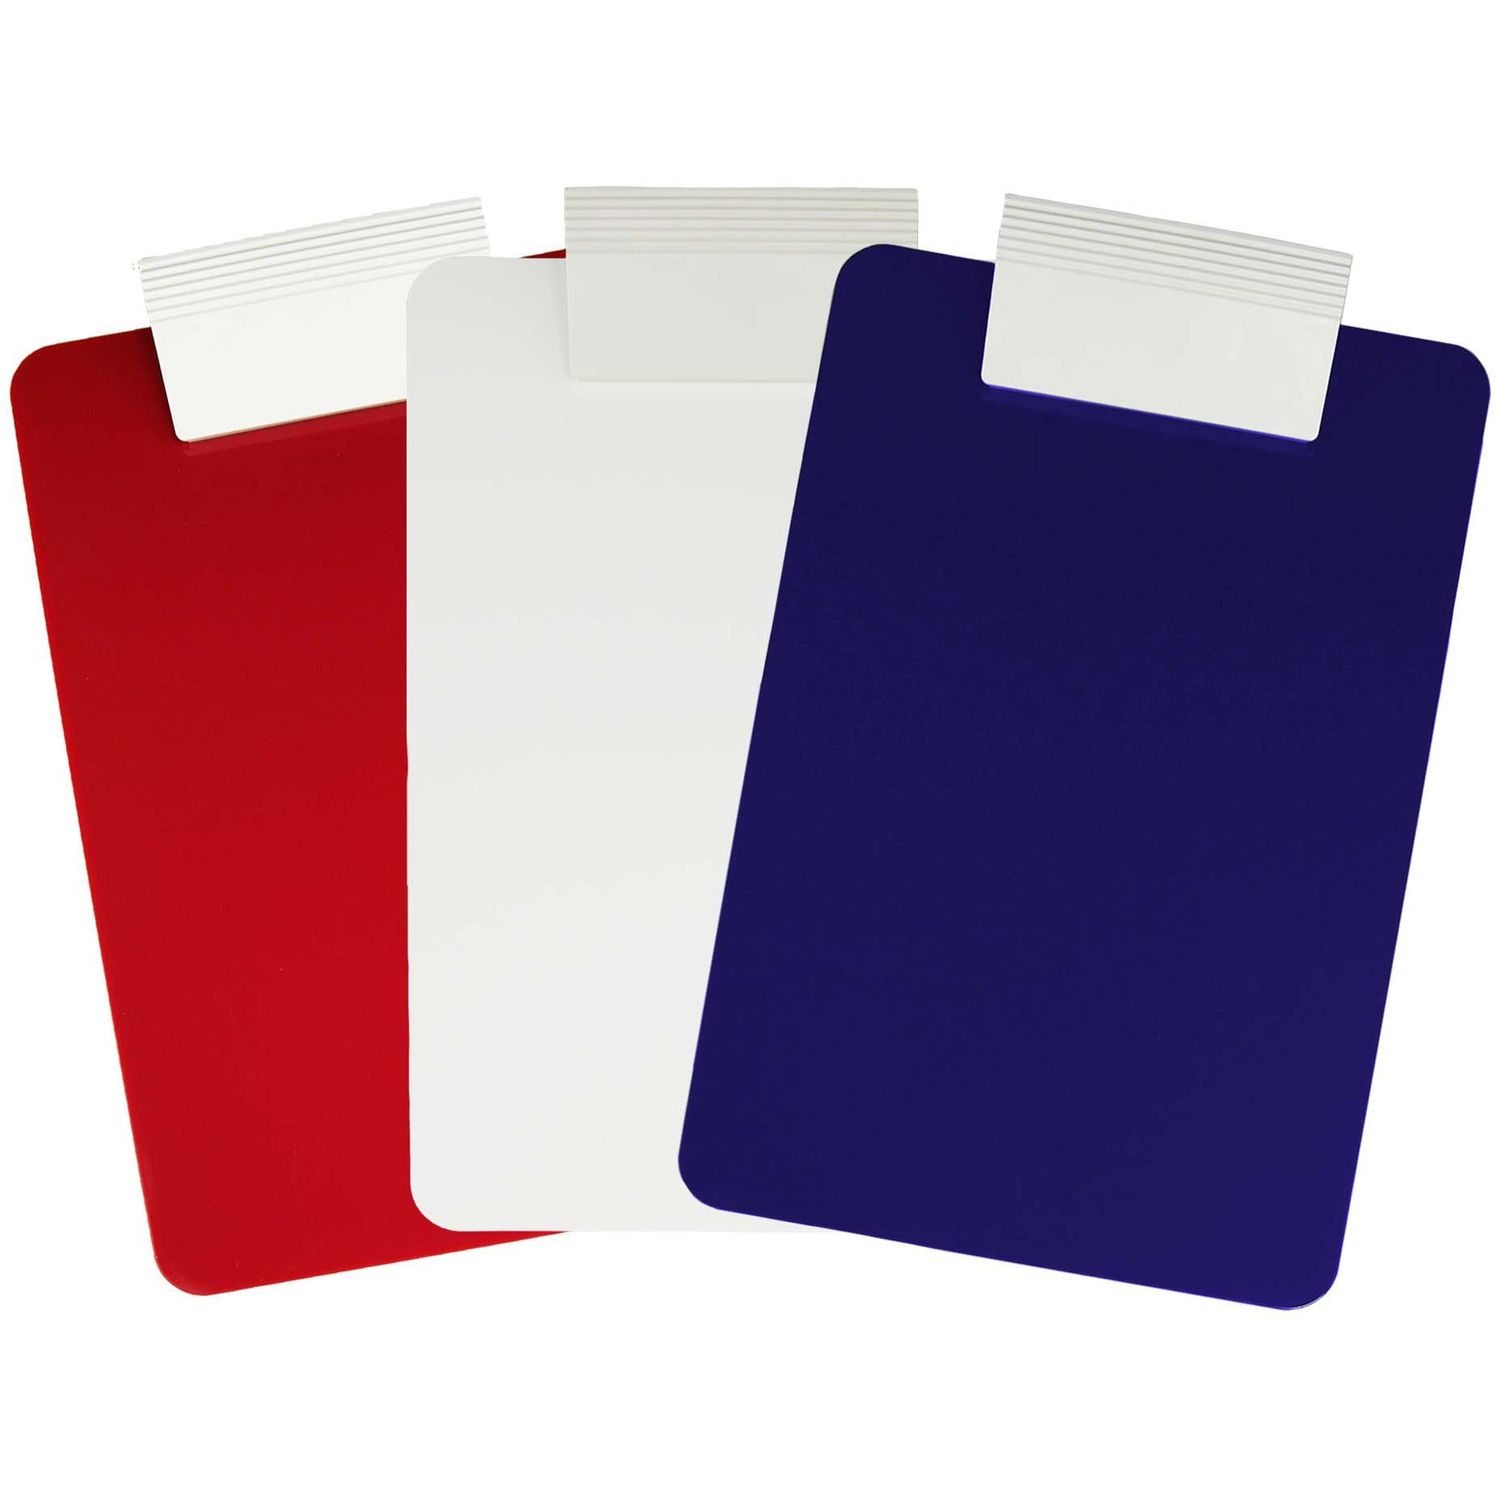 Antimicrobial Clipboard Low Profile, 8 1/2" x 11", Red, Blue, 1 / Each